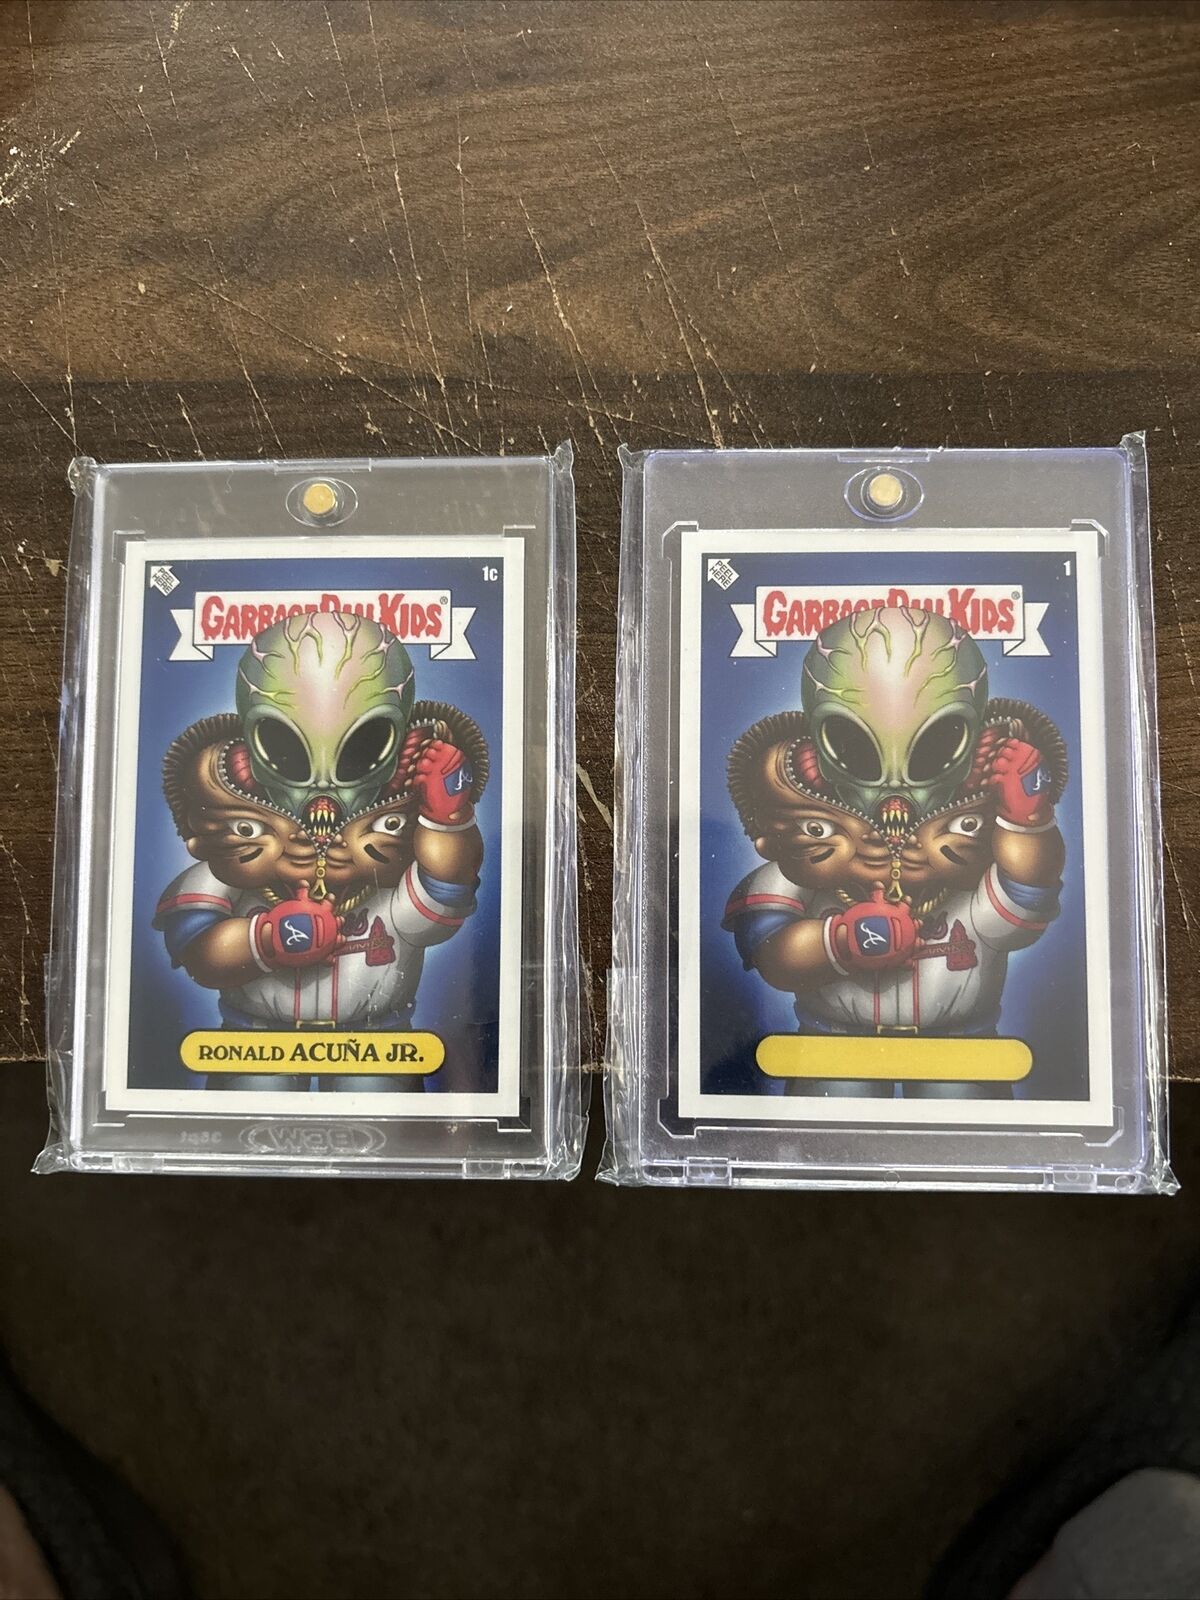 alex pardee cards gpk mlb series 2 1 And 1c Ronald Acuna Jr